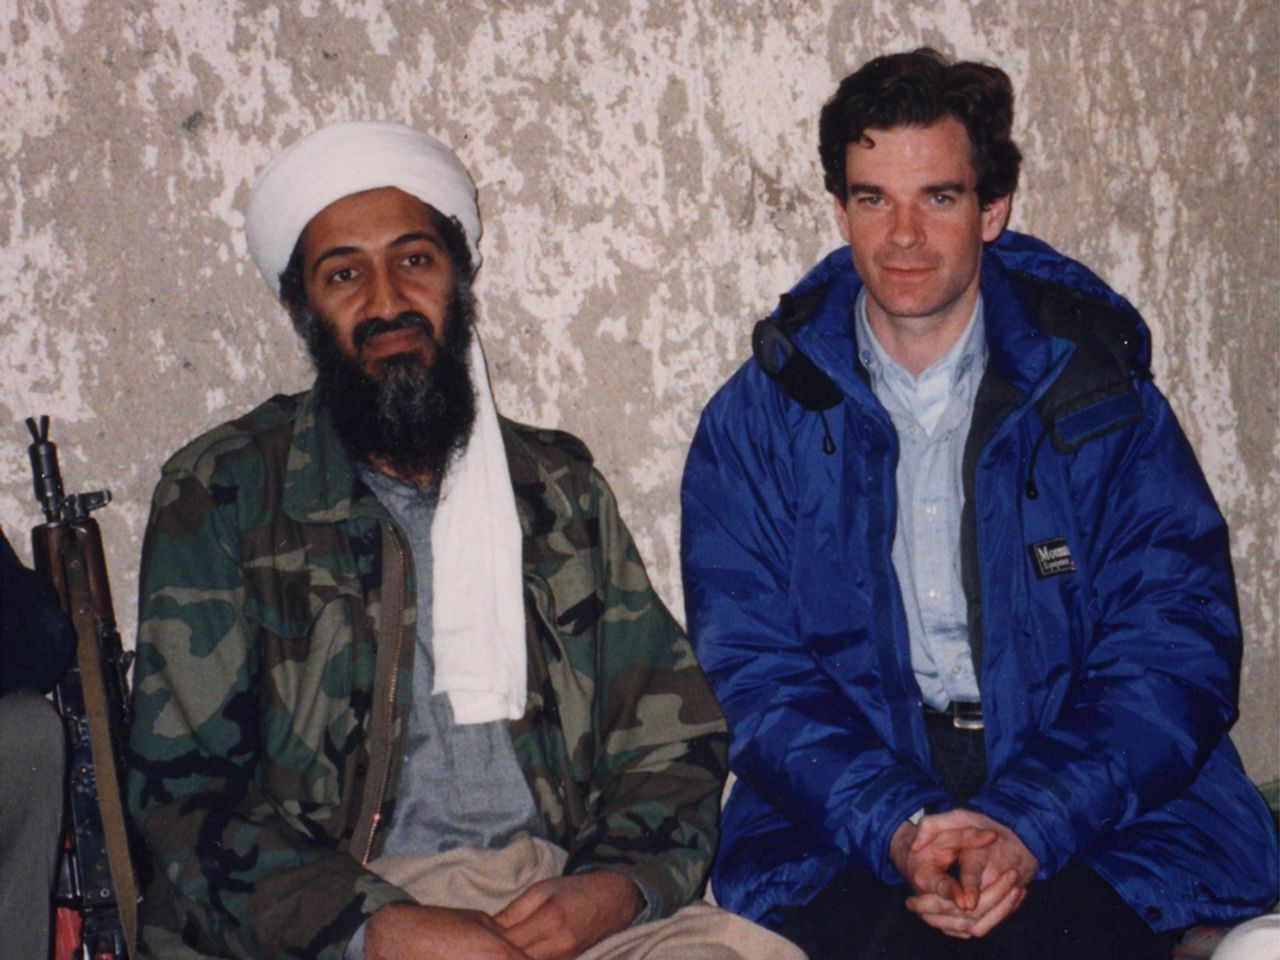 In 1997, CNN's Peter Bergen, right, produced the first-ever TV interview with Osama Bin Laden. During the segment, the al Qaeda leader declared war on the United States.